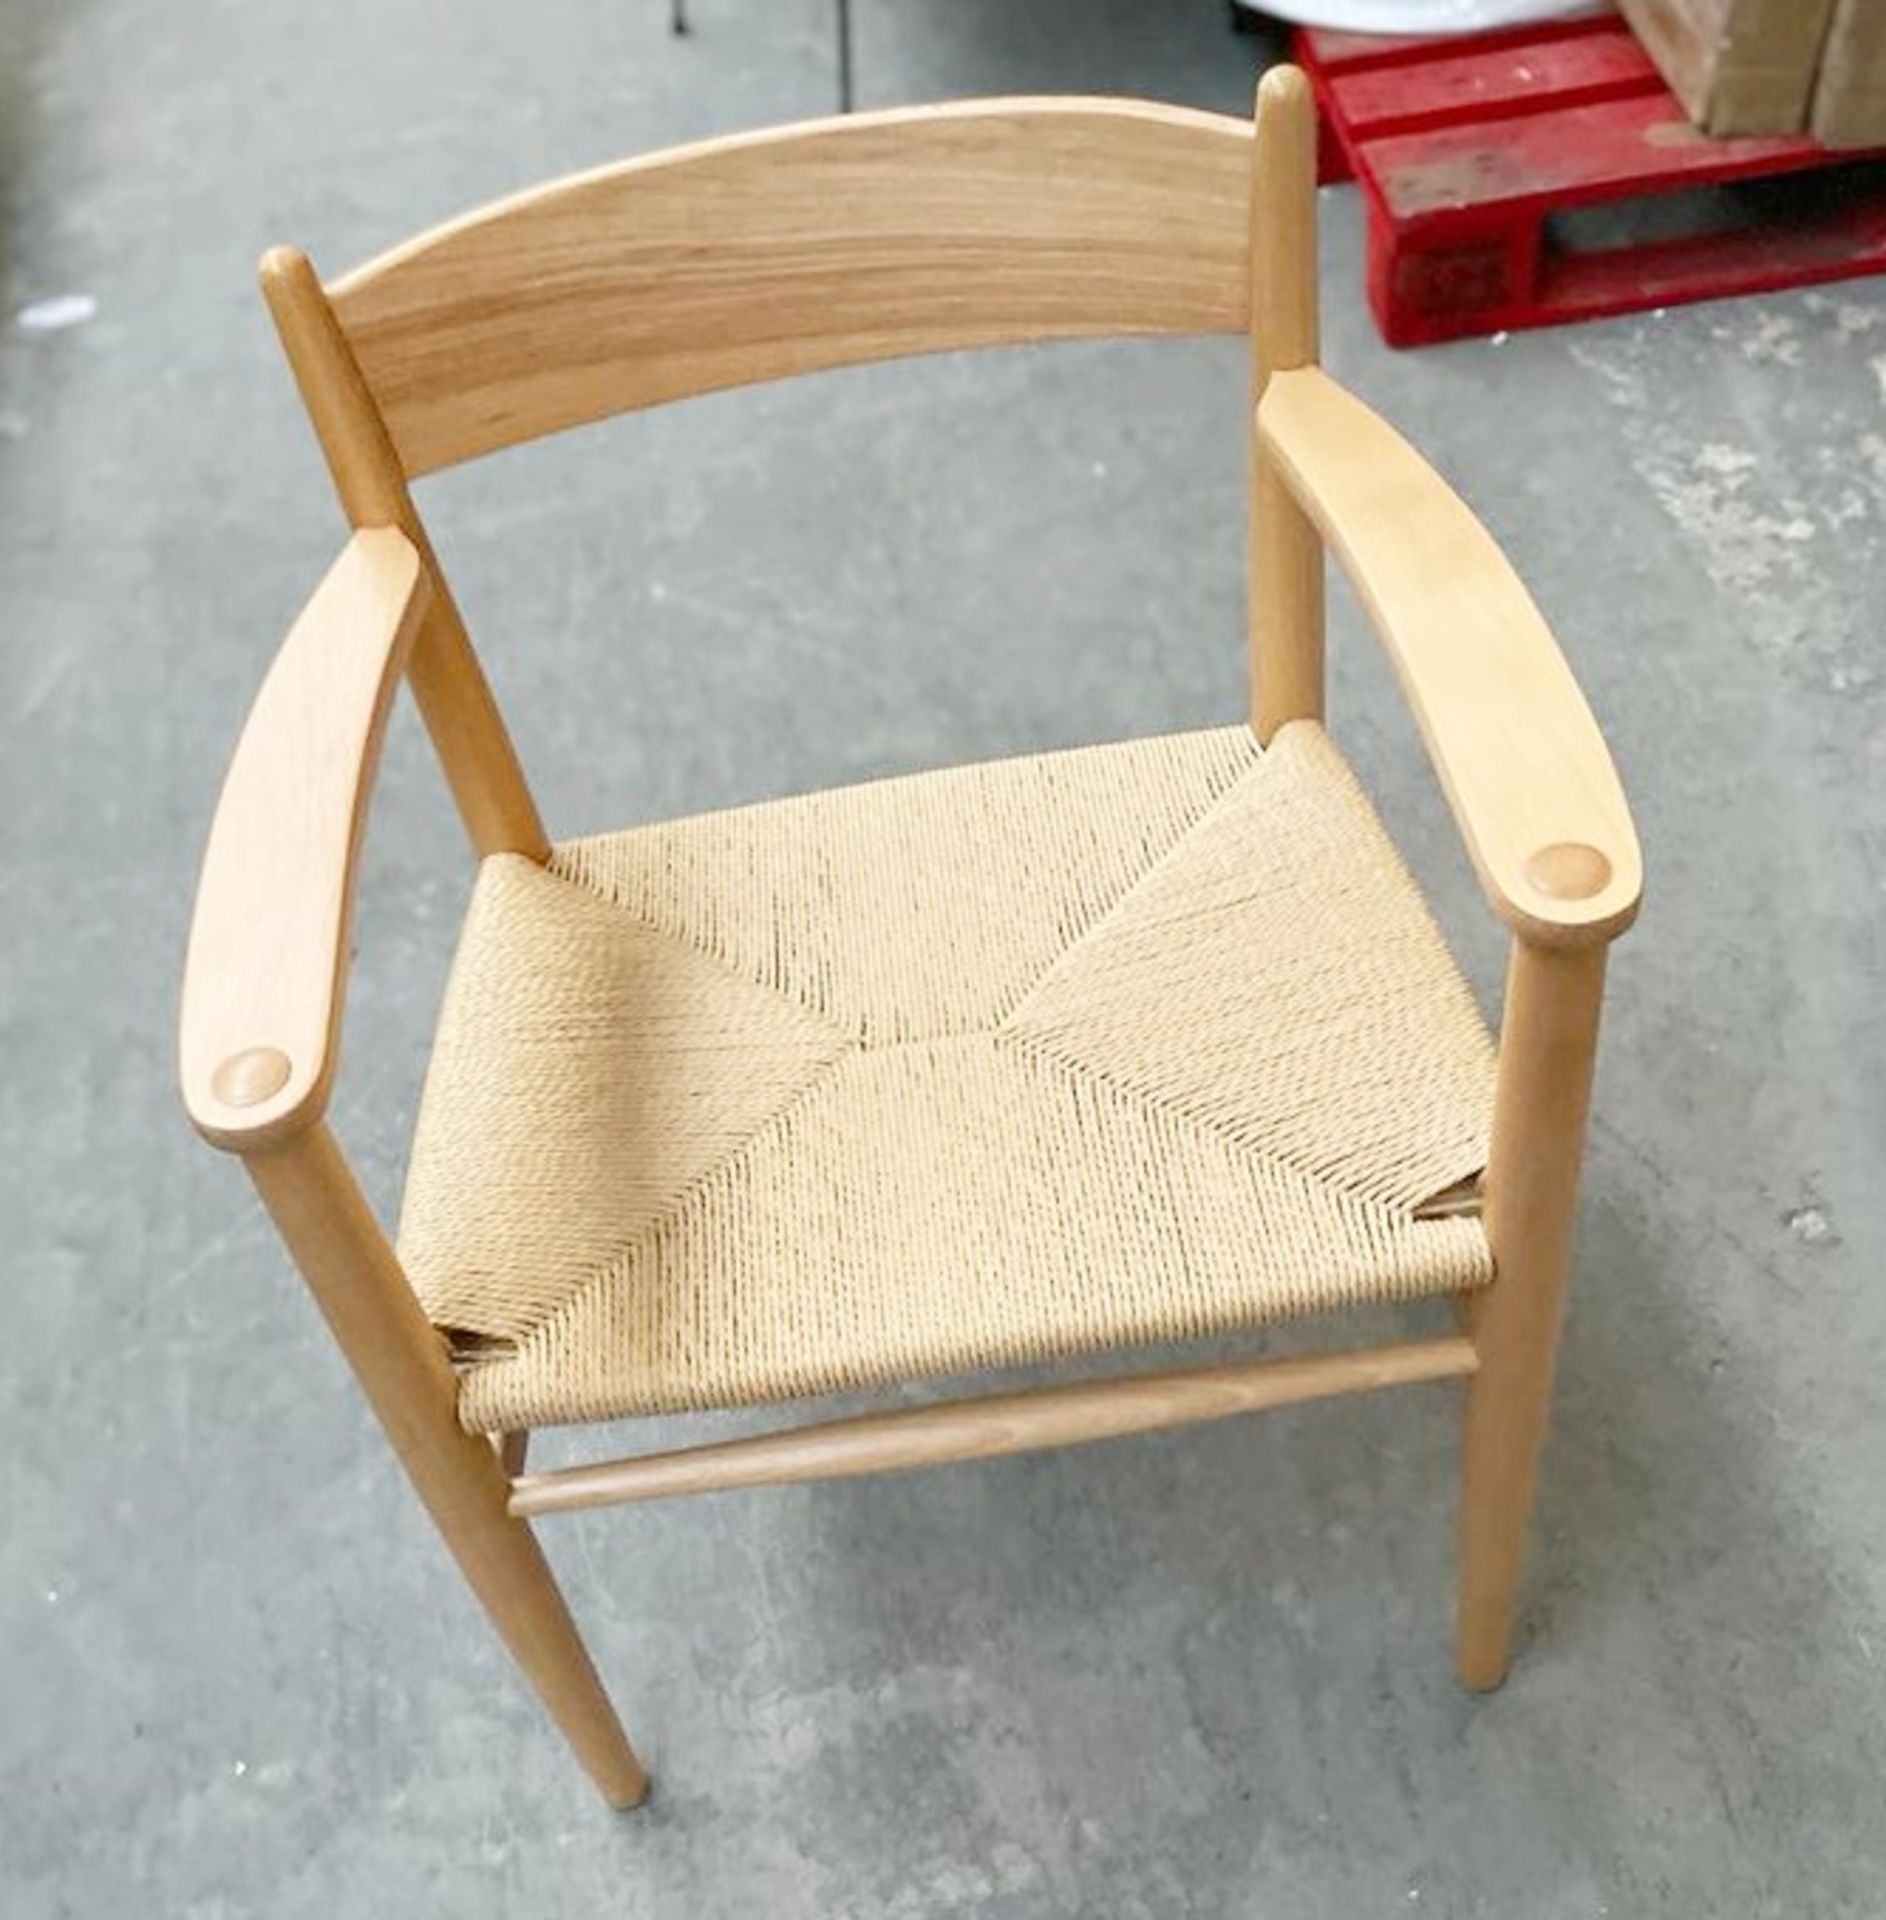 4 x Nielsen Natural + Natural Cord Chair With Arm Rests - Dimensions: 50(h) x 48(d) x 58(w) cm - - Image 6 of 8